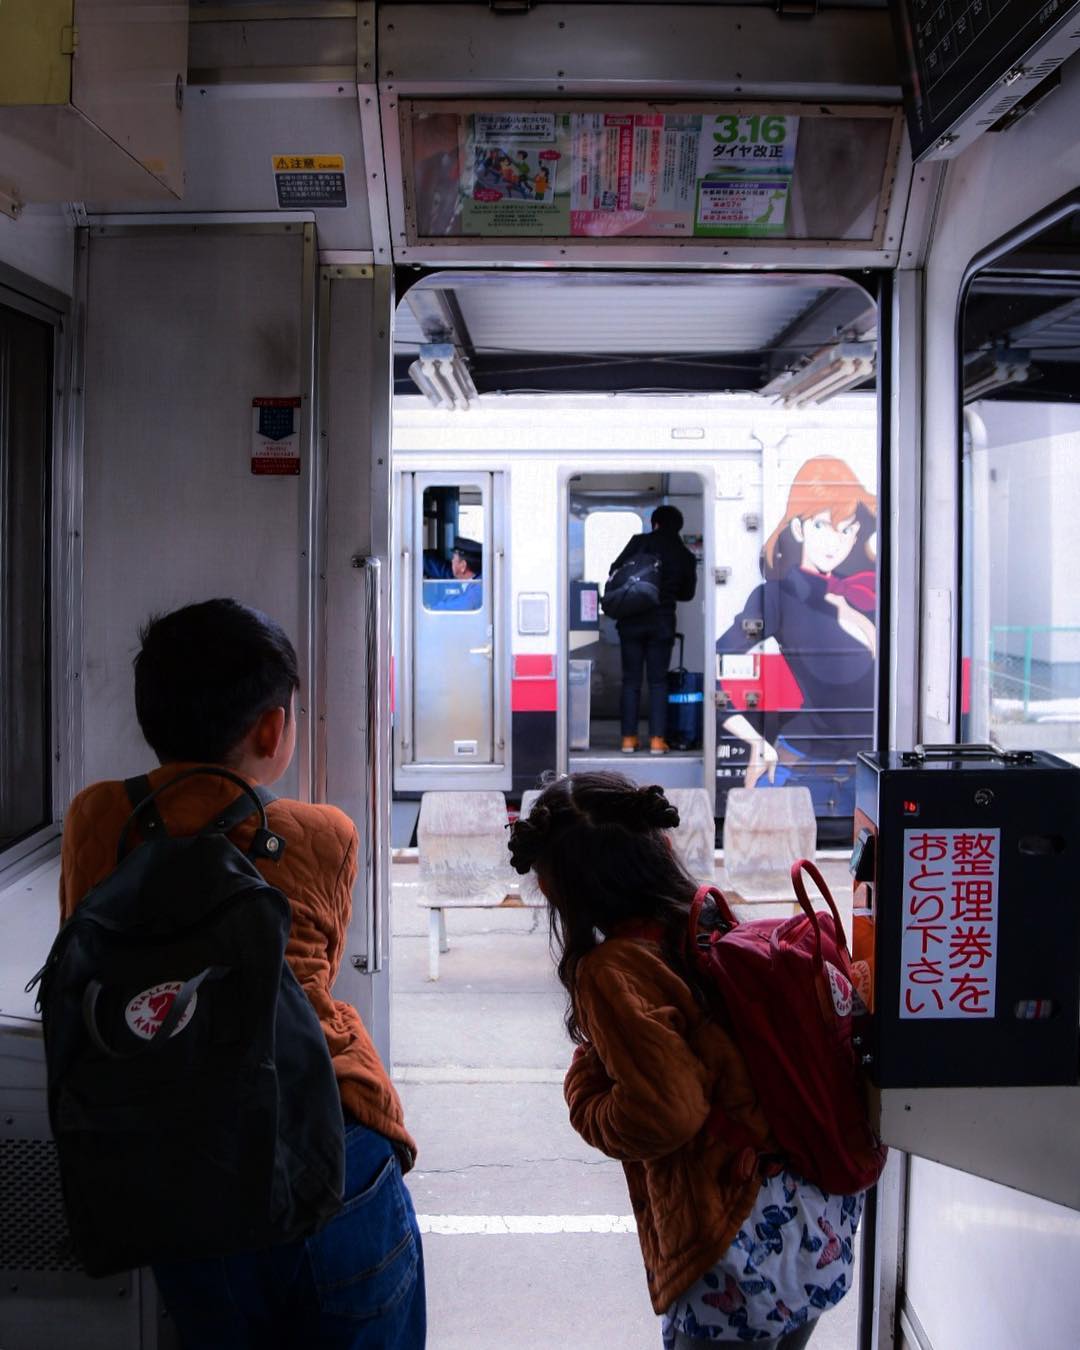 Children looking at outside of train